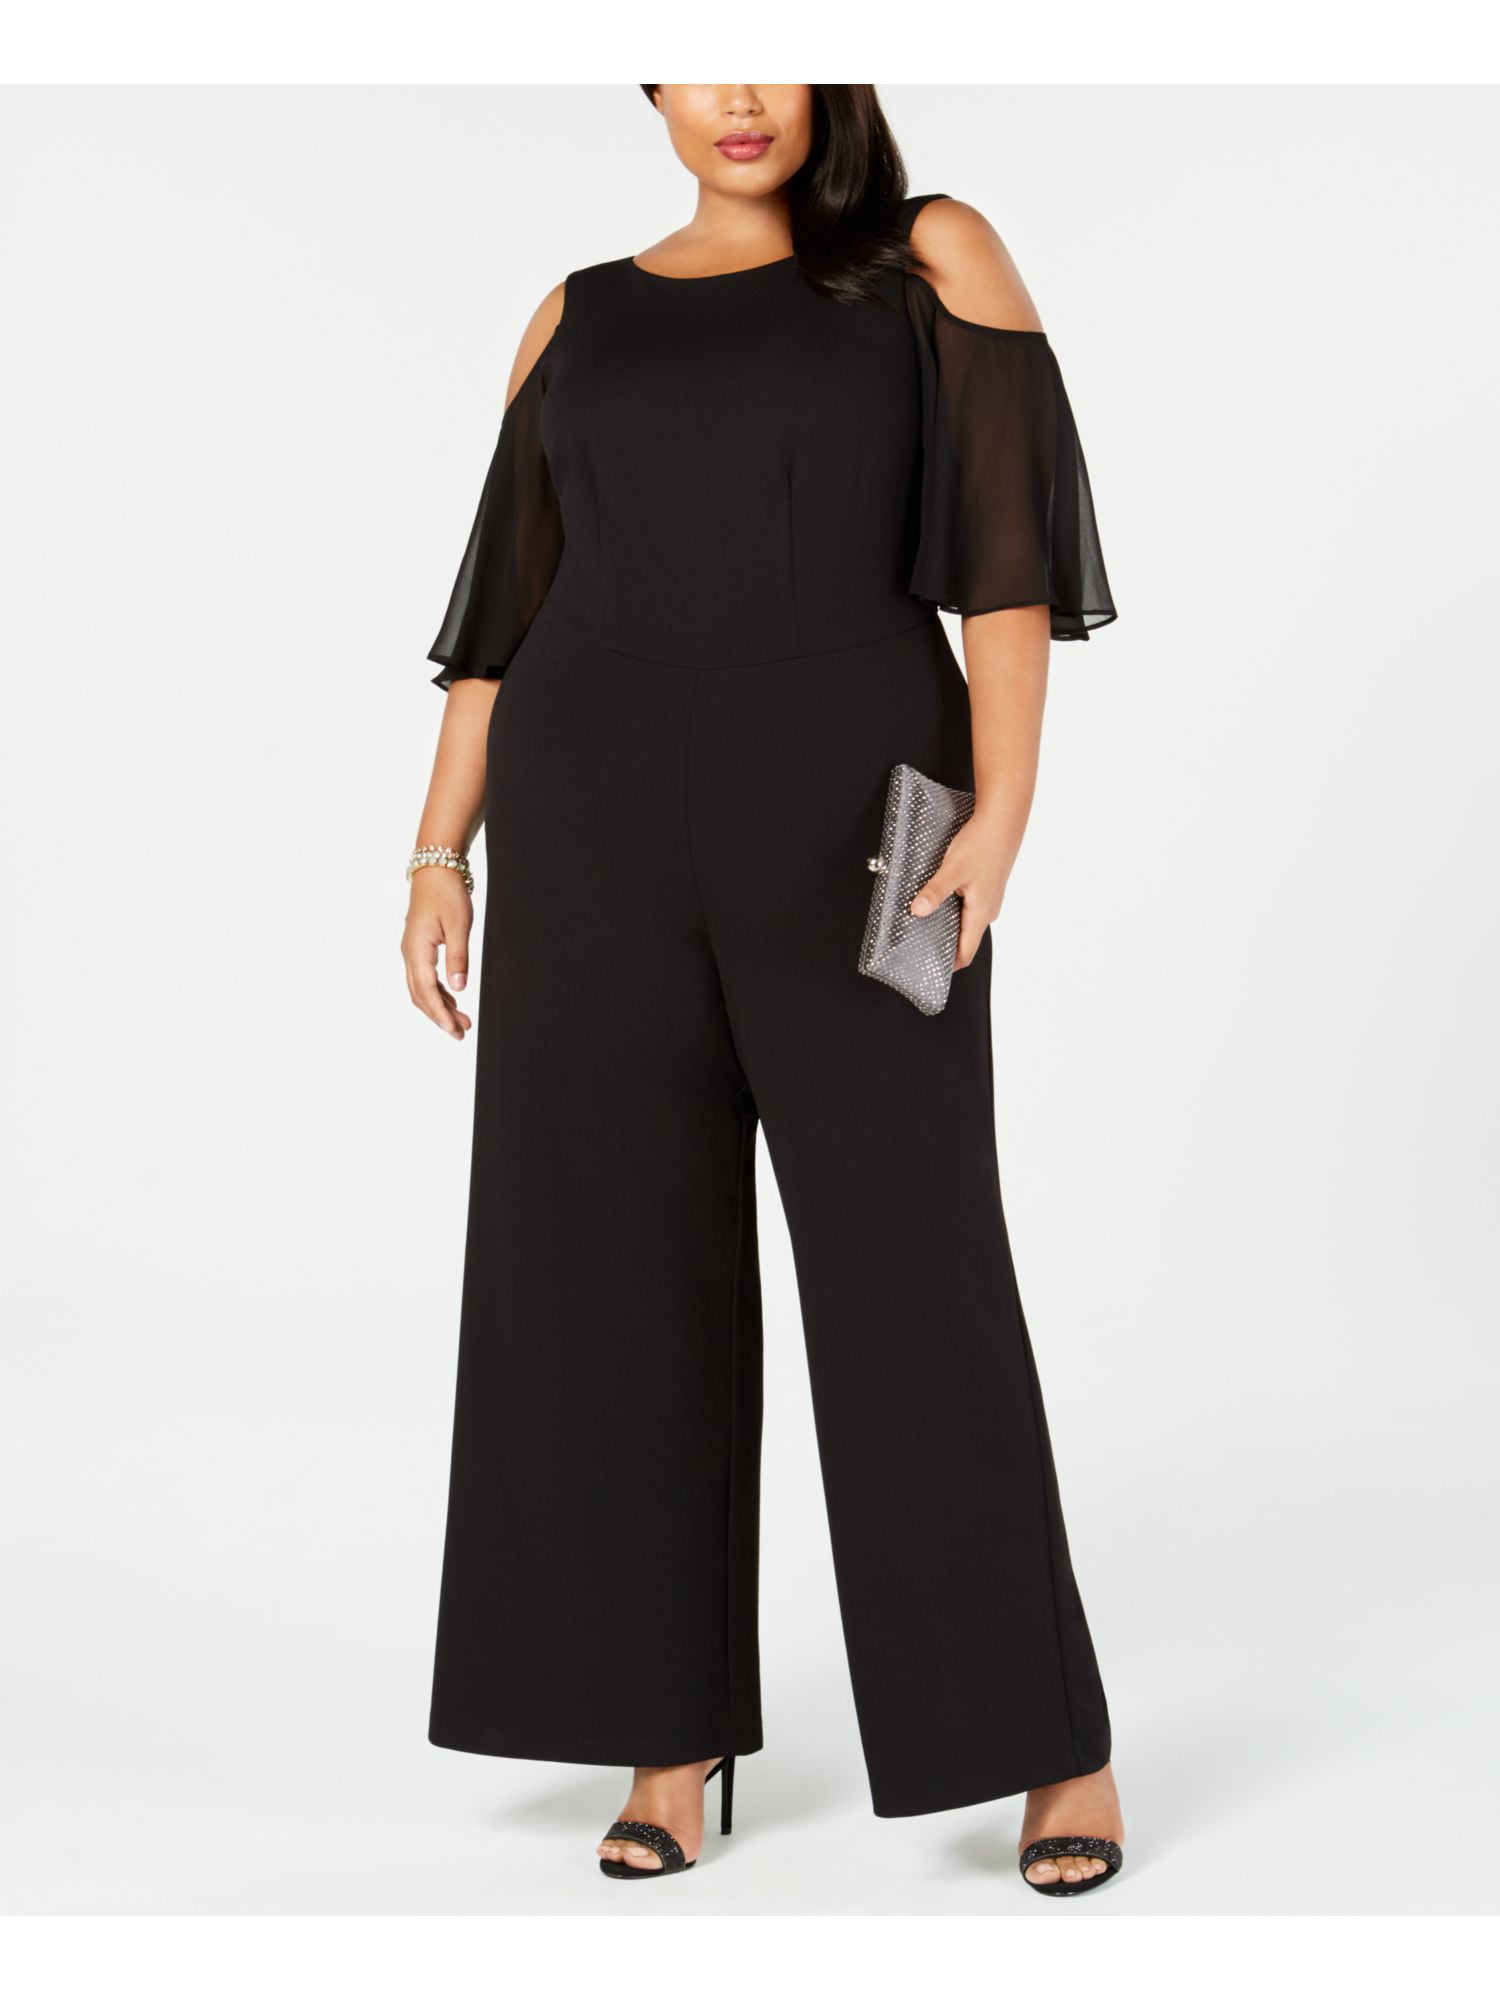 Connected Apparel - CONNECTED APPAREL Womens Black Bell Sleeve Jewel